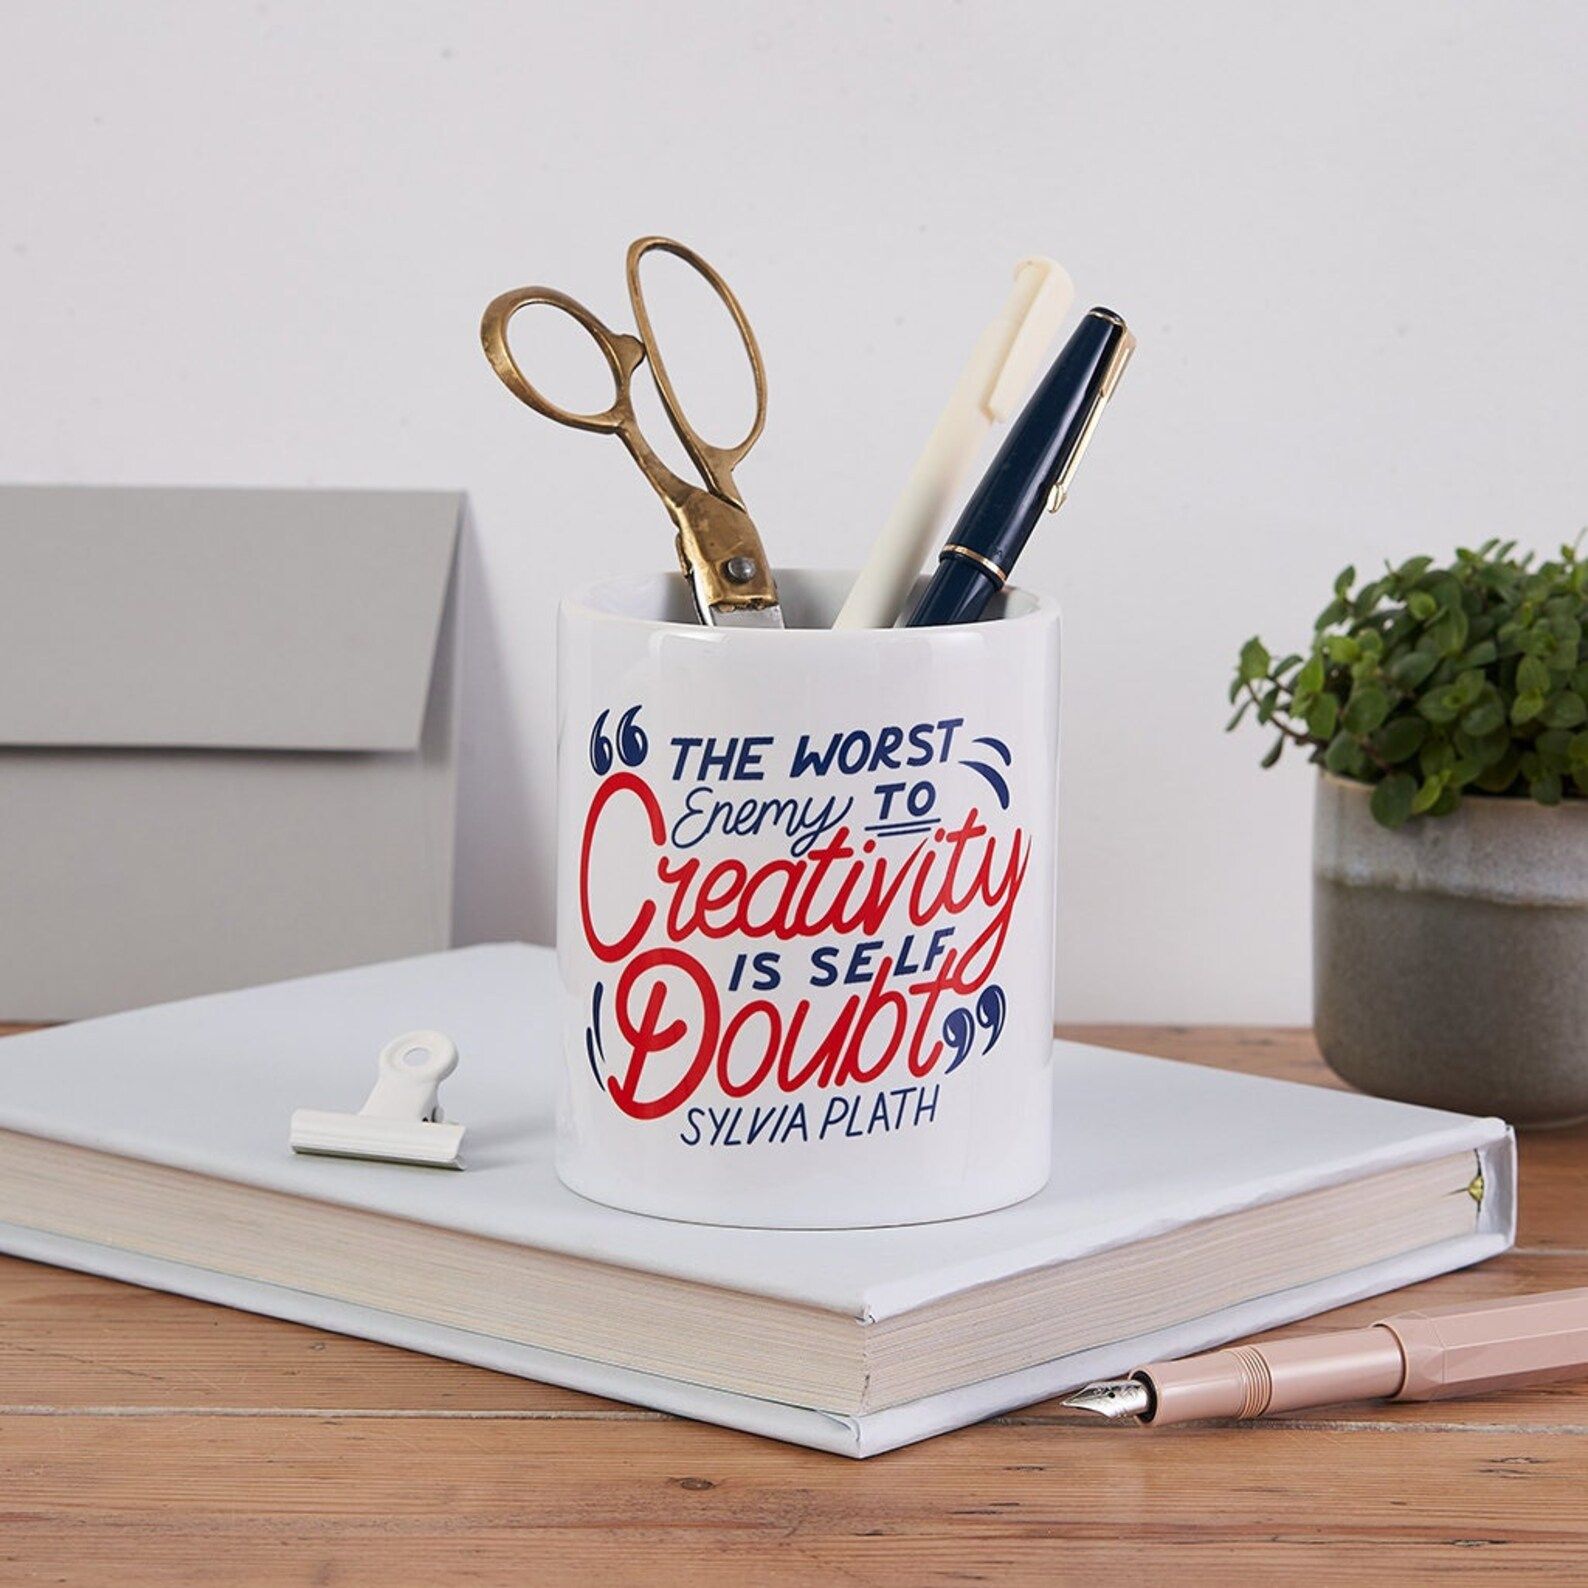 A ceramic pen pot with a quote that reads "The enemy to creativity is Self Doubt. --Sylvia Plath" in red and blue script.